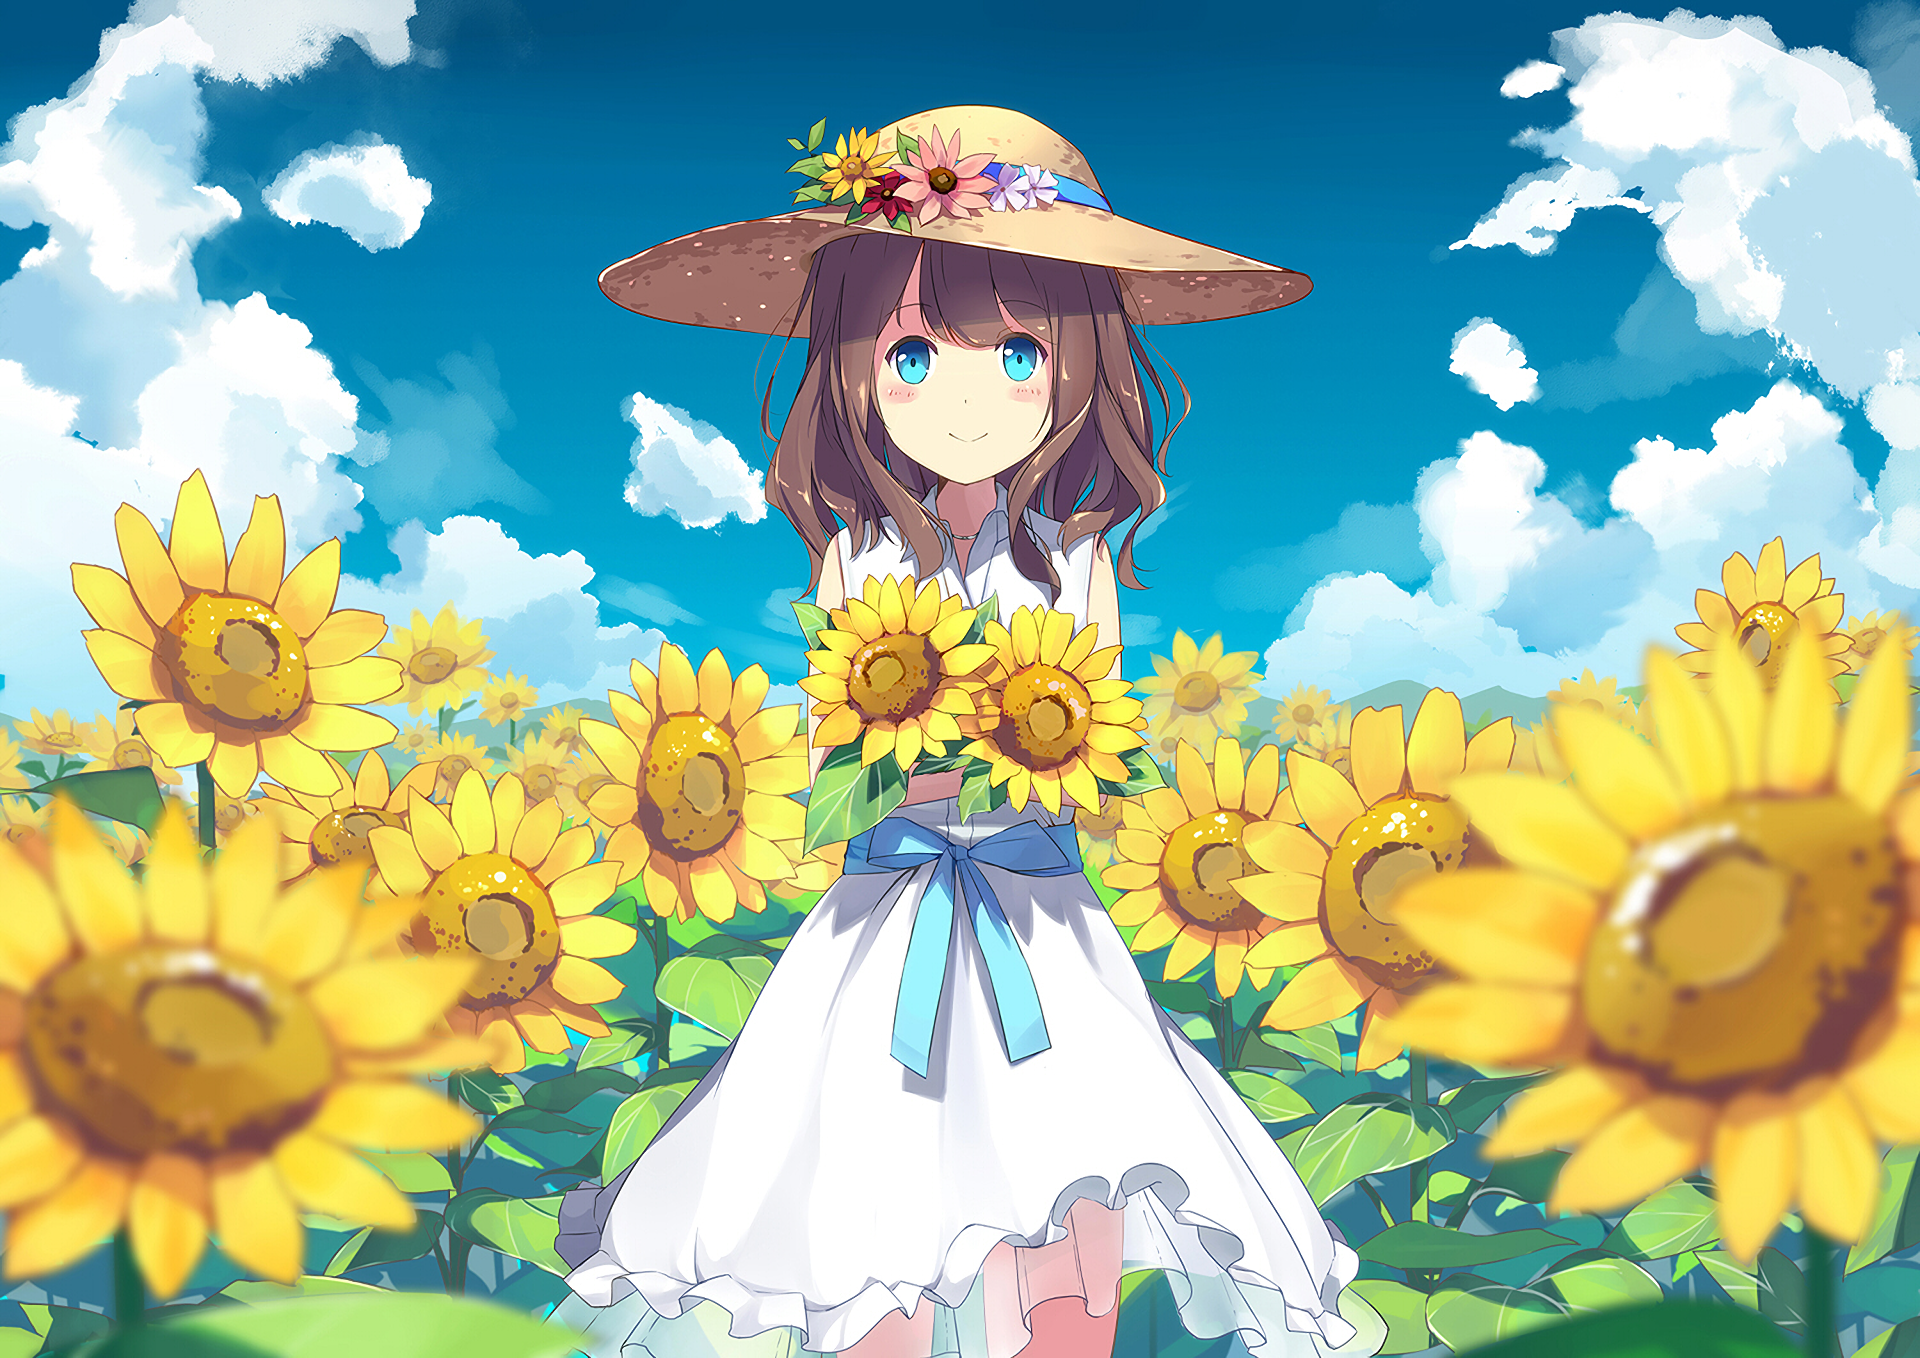 Original Wallpaper Background Image. View, download, comment, and rate. Anime flower, Anime summer, Anime art girl